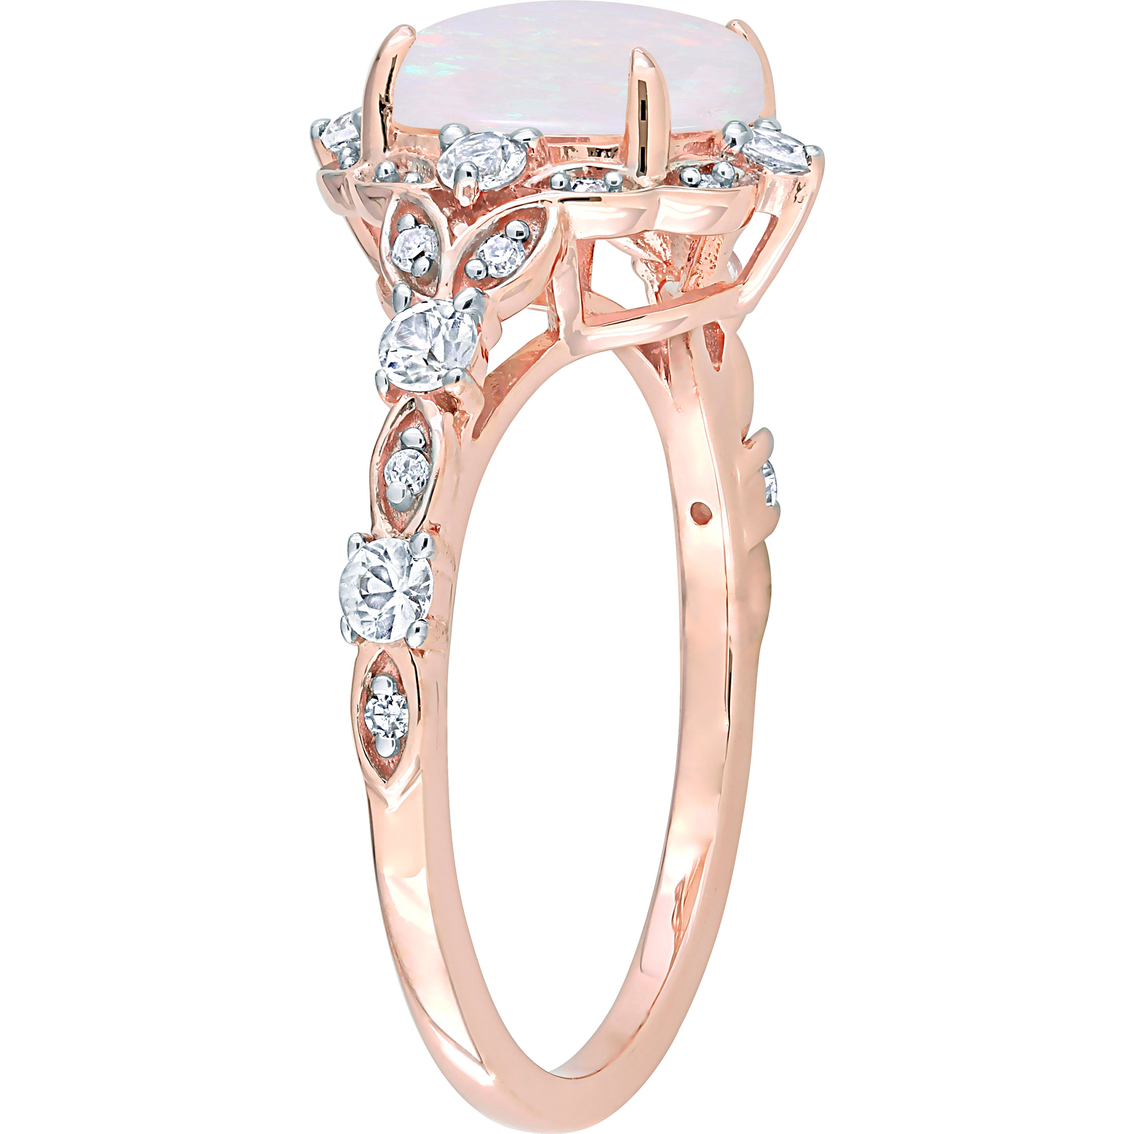 Sofia B. 10K Rose Gold Opal, White Sapphire and Diamond Accent Vintage Ring - Image 3 of 4